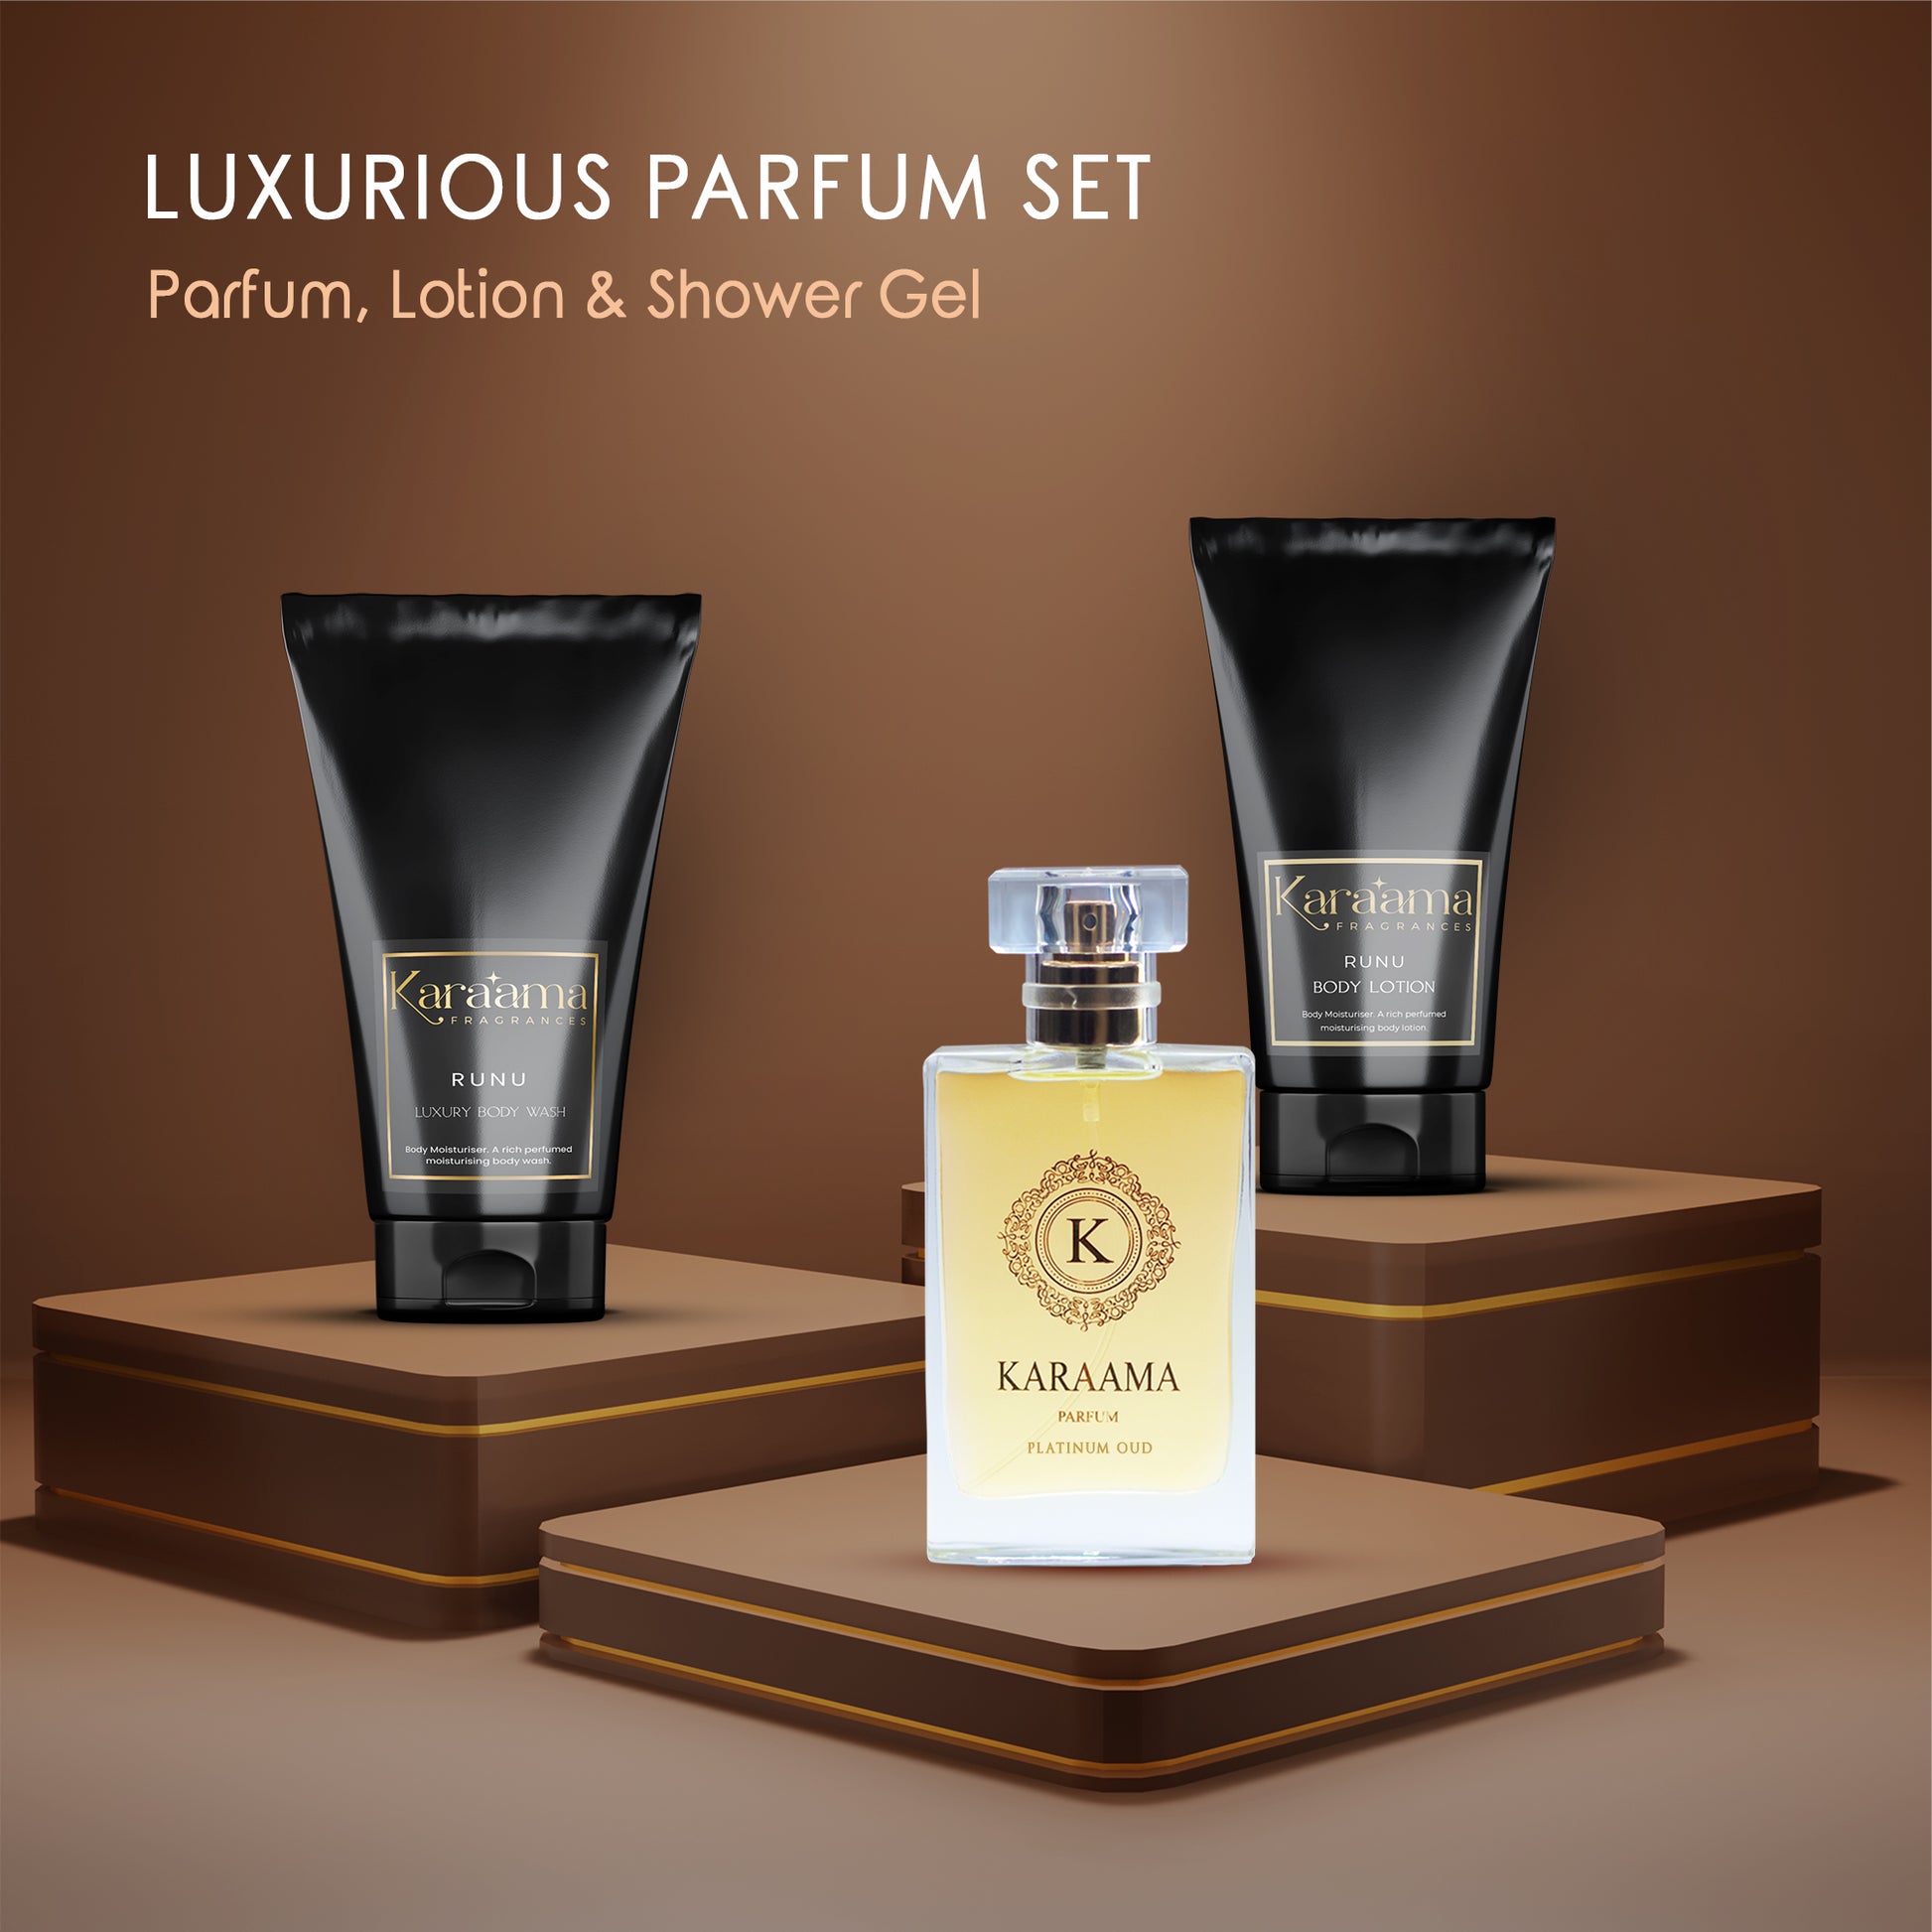 Elevate your self-care routine with Karaama's Luxurious Parfum Set, featuring an opulent blend of perfumed lotion, shower gel, and Platinum Oud parfum, elegantly presented for the ultimate sensory indulgence. #LuxuryBeauty #ParfumSet #SelfCareTrends